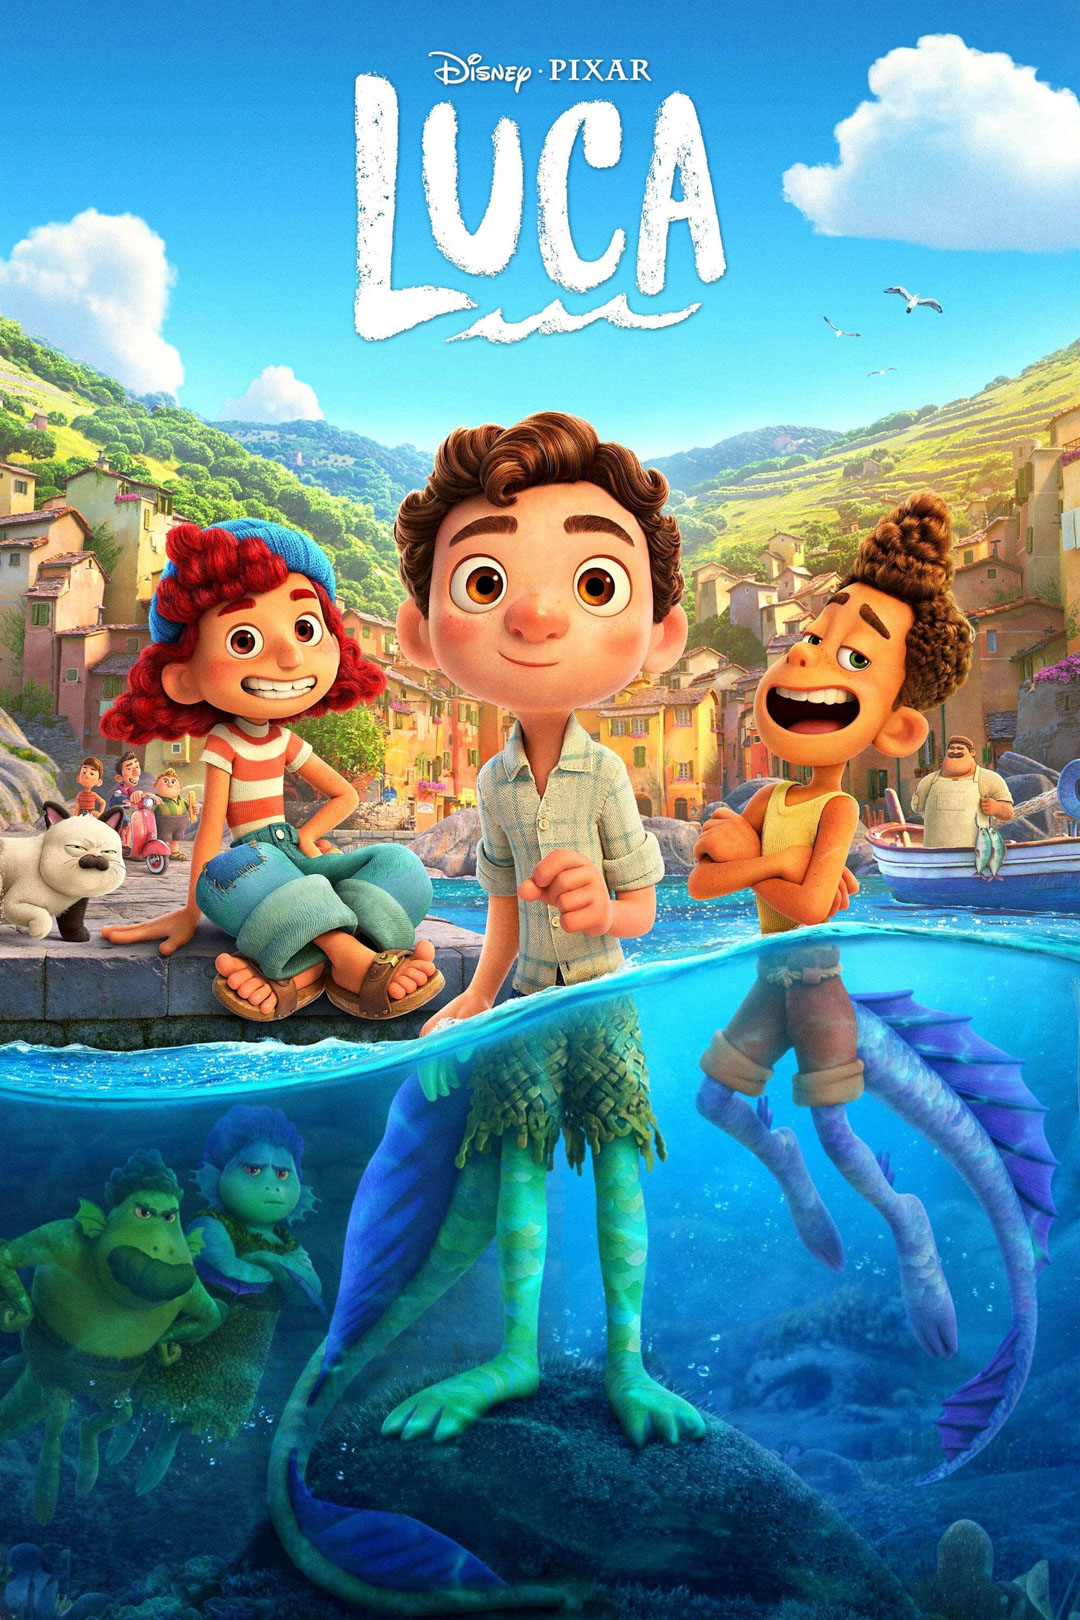 A movie poster reading "Disney, Pixar, Luca" featuring three cartoon characters, two of which are partially submerged in water and are half-human and half-fish.